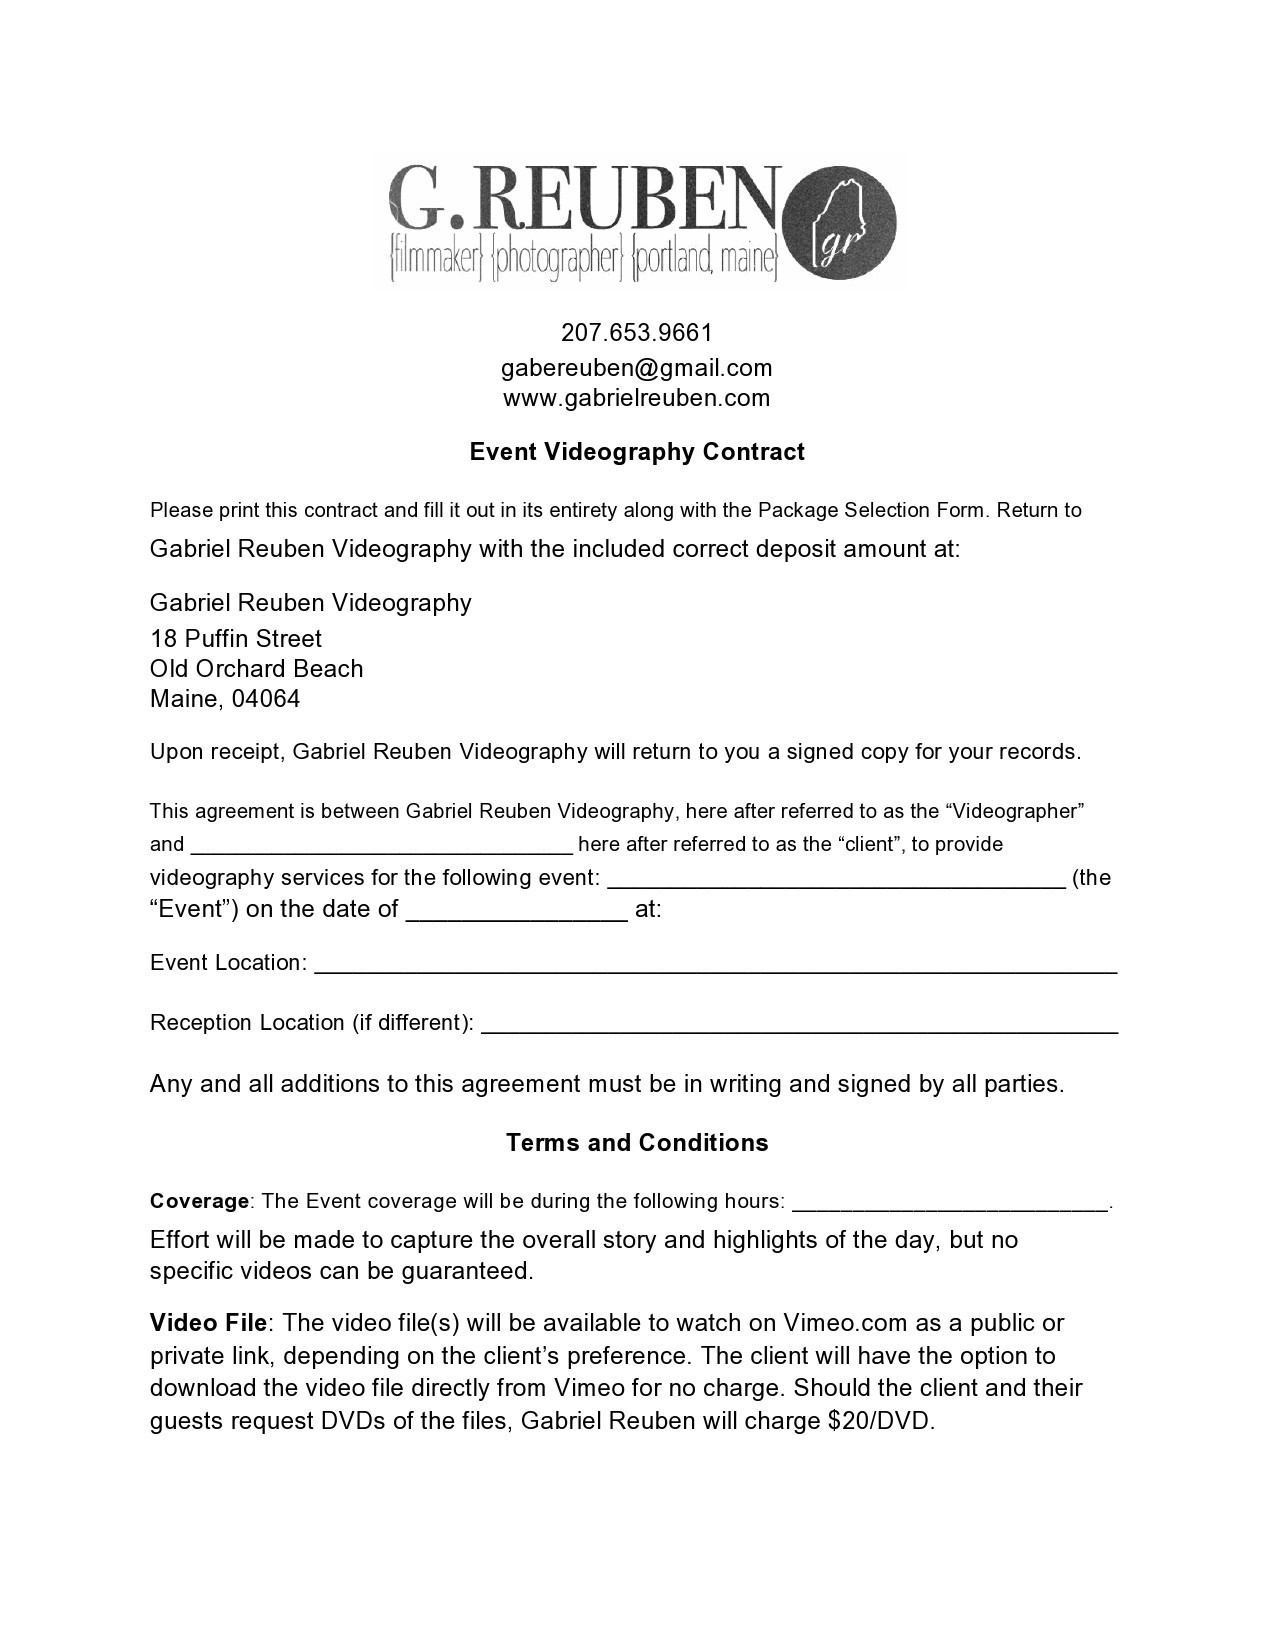 Free videography contract 14